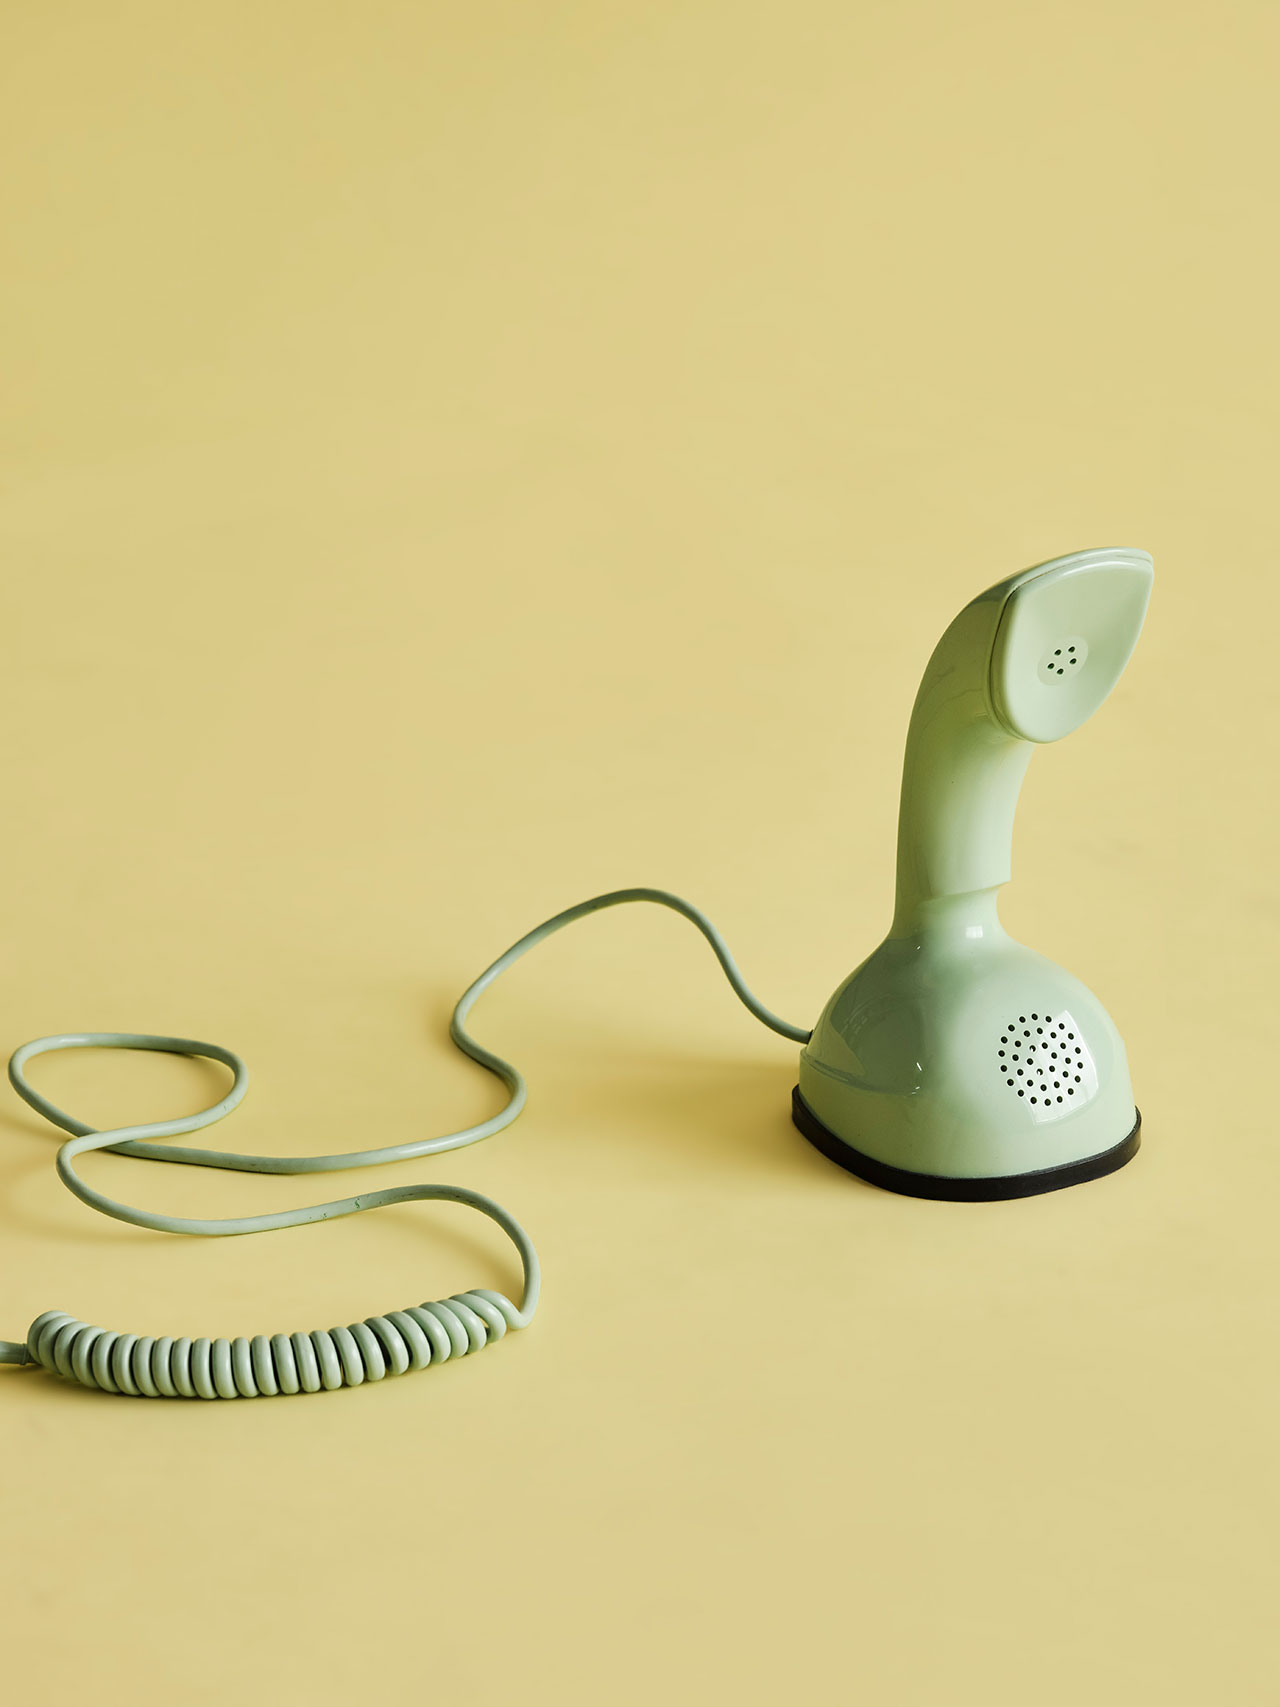 'Ericofon', also known as 'Kobra' telephone, produced for LM Ericsson. Part of 'Made in Sweden' exhibition by Bukowskis.
Photography courtesy of Bukowskis.